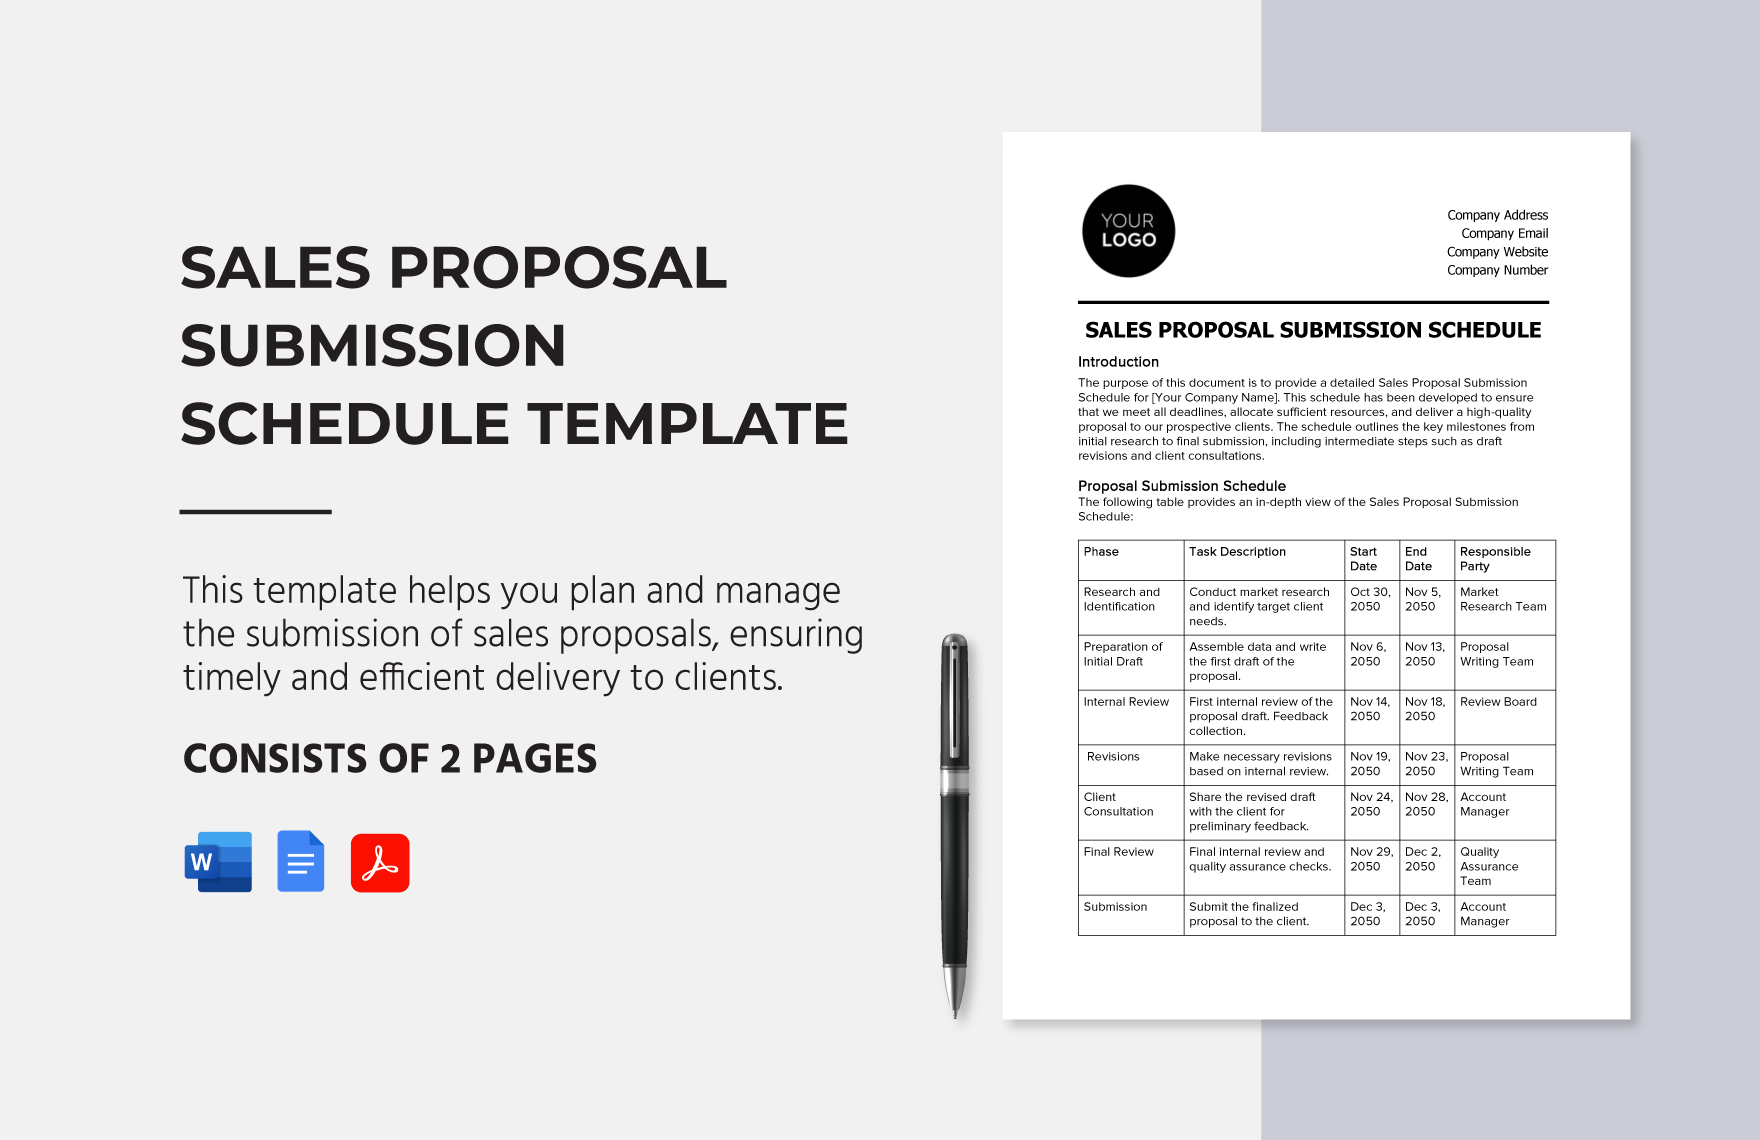 Sales Proposal Submission Schedule Template in Google Docs, PDF, PowerPoint